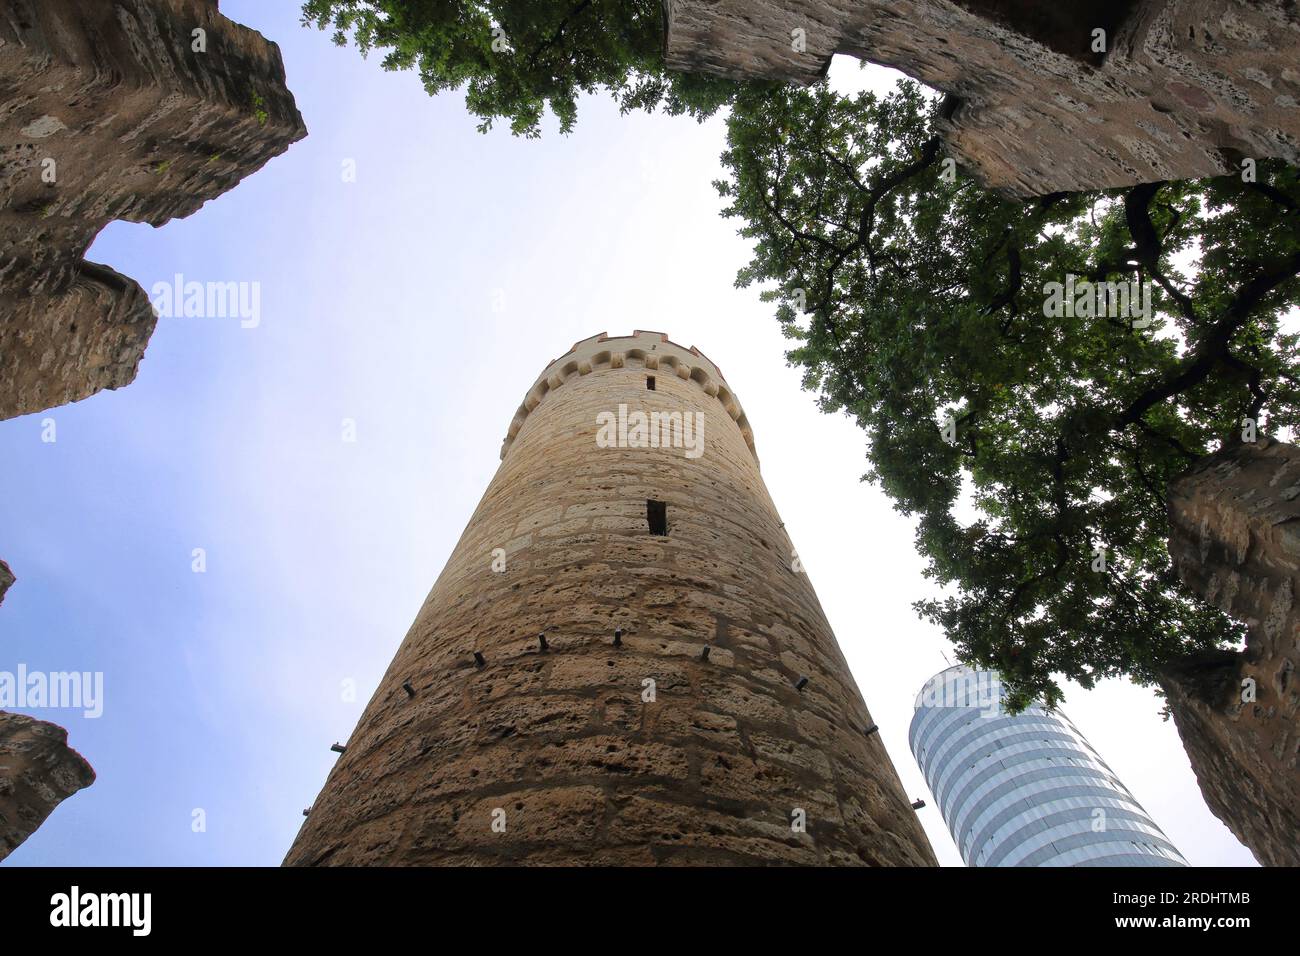 Looking up with historic Pulverturm, city fortifications and Jentower, Jena, Thuringia, Germany Stock Photo